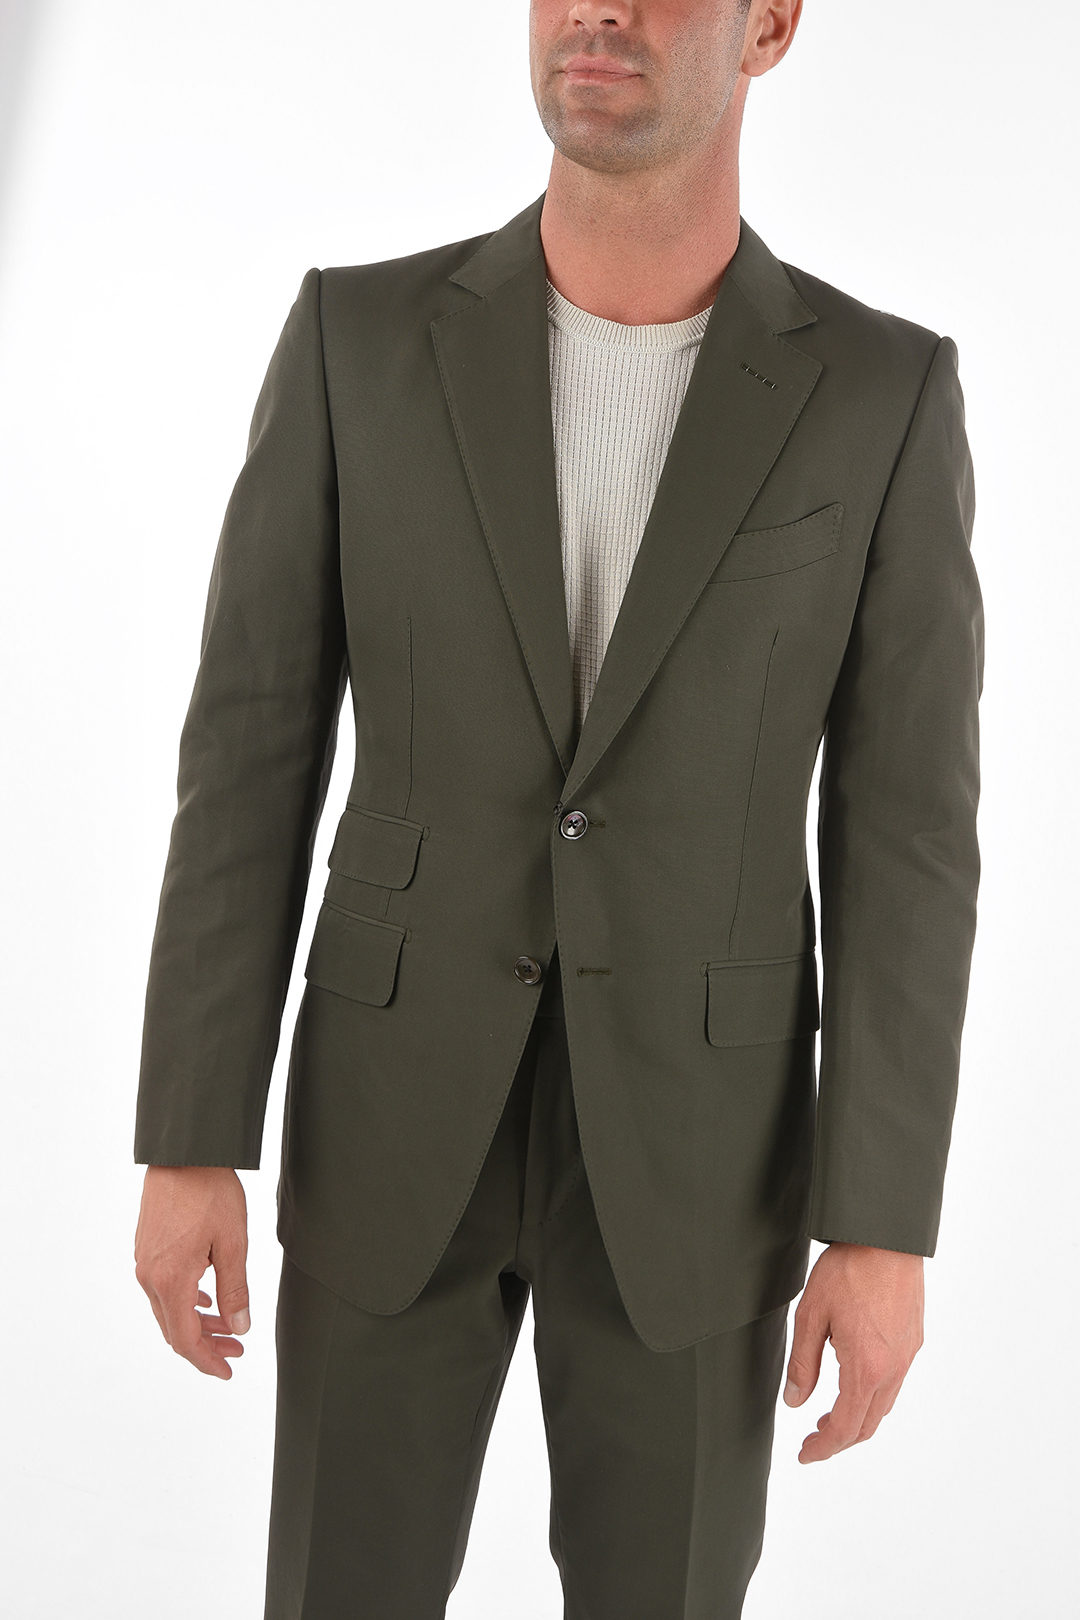 Tom Ford side vents notch lapel O'CONNOR 2-button suit men - Glamood Outlet